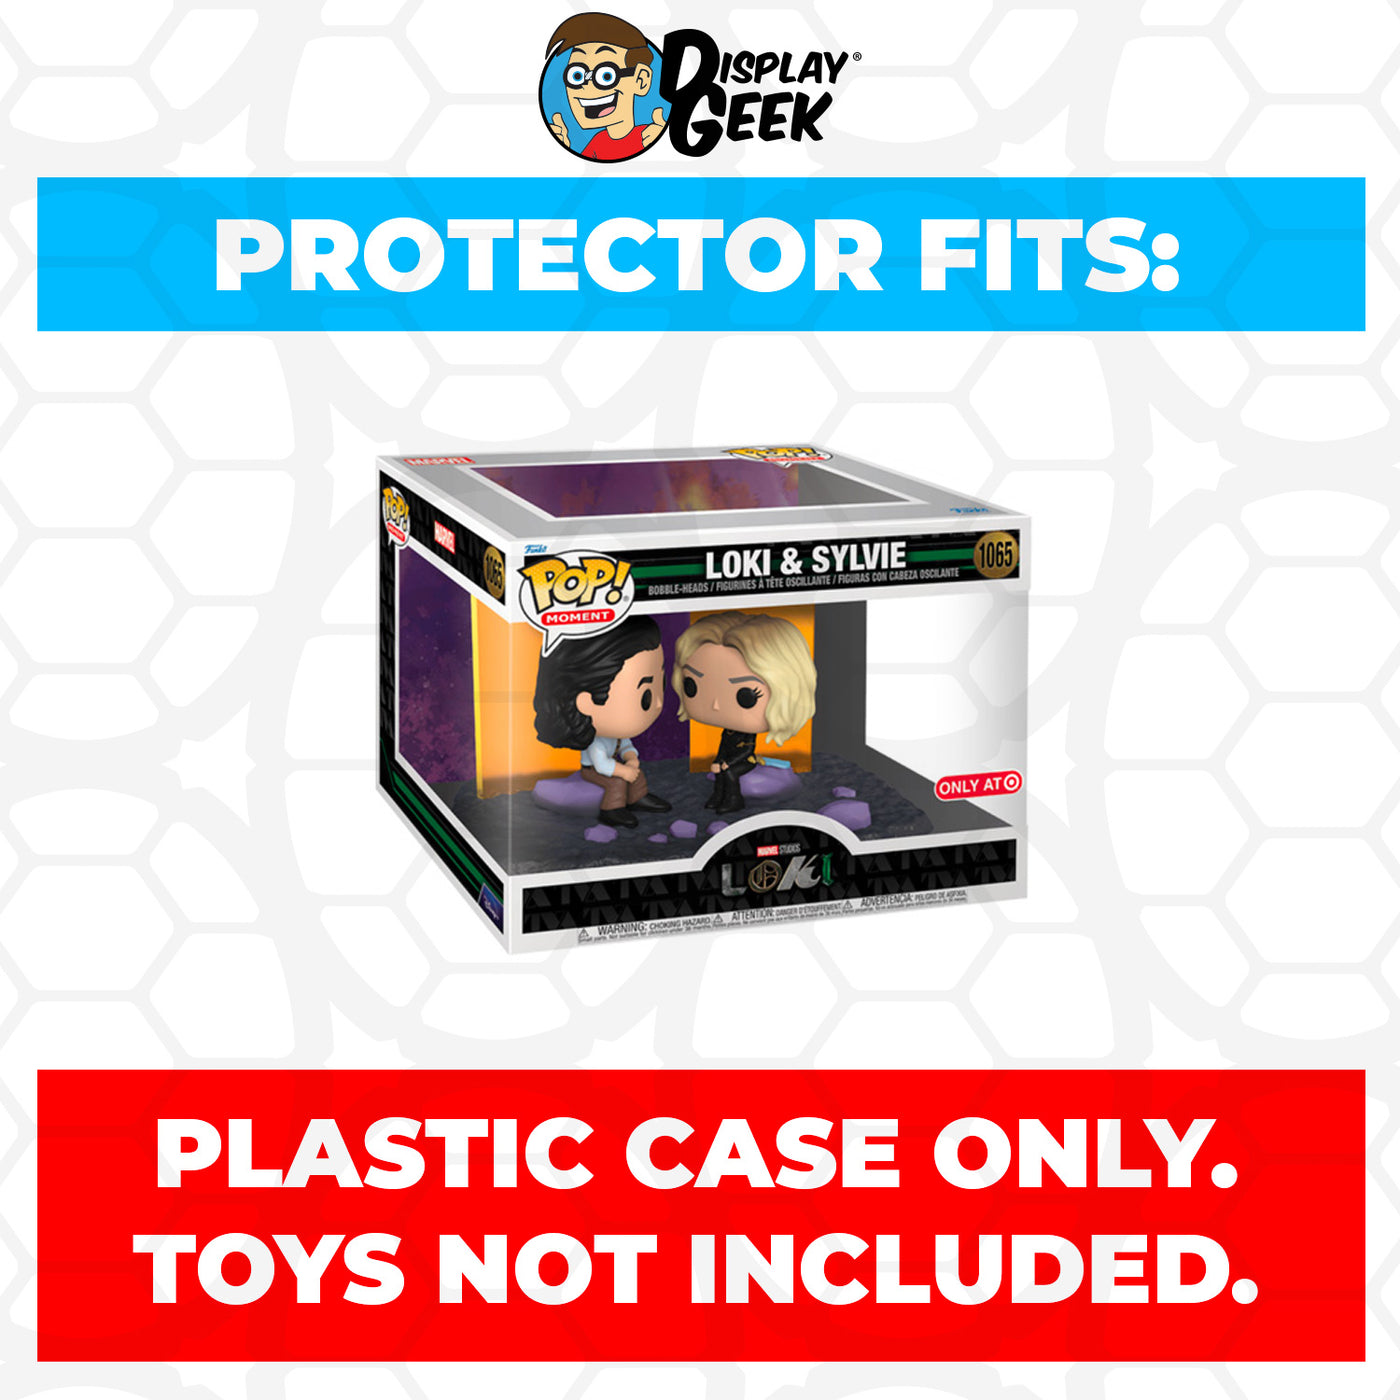 Pop Protector for Loki & Sylvie #1065 Funko Pop Moment on The Protector Guide App by Display Geek